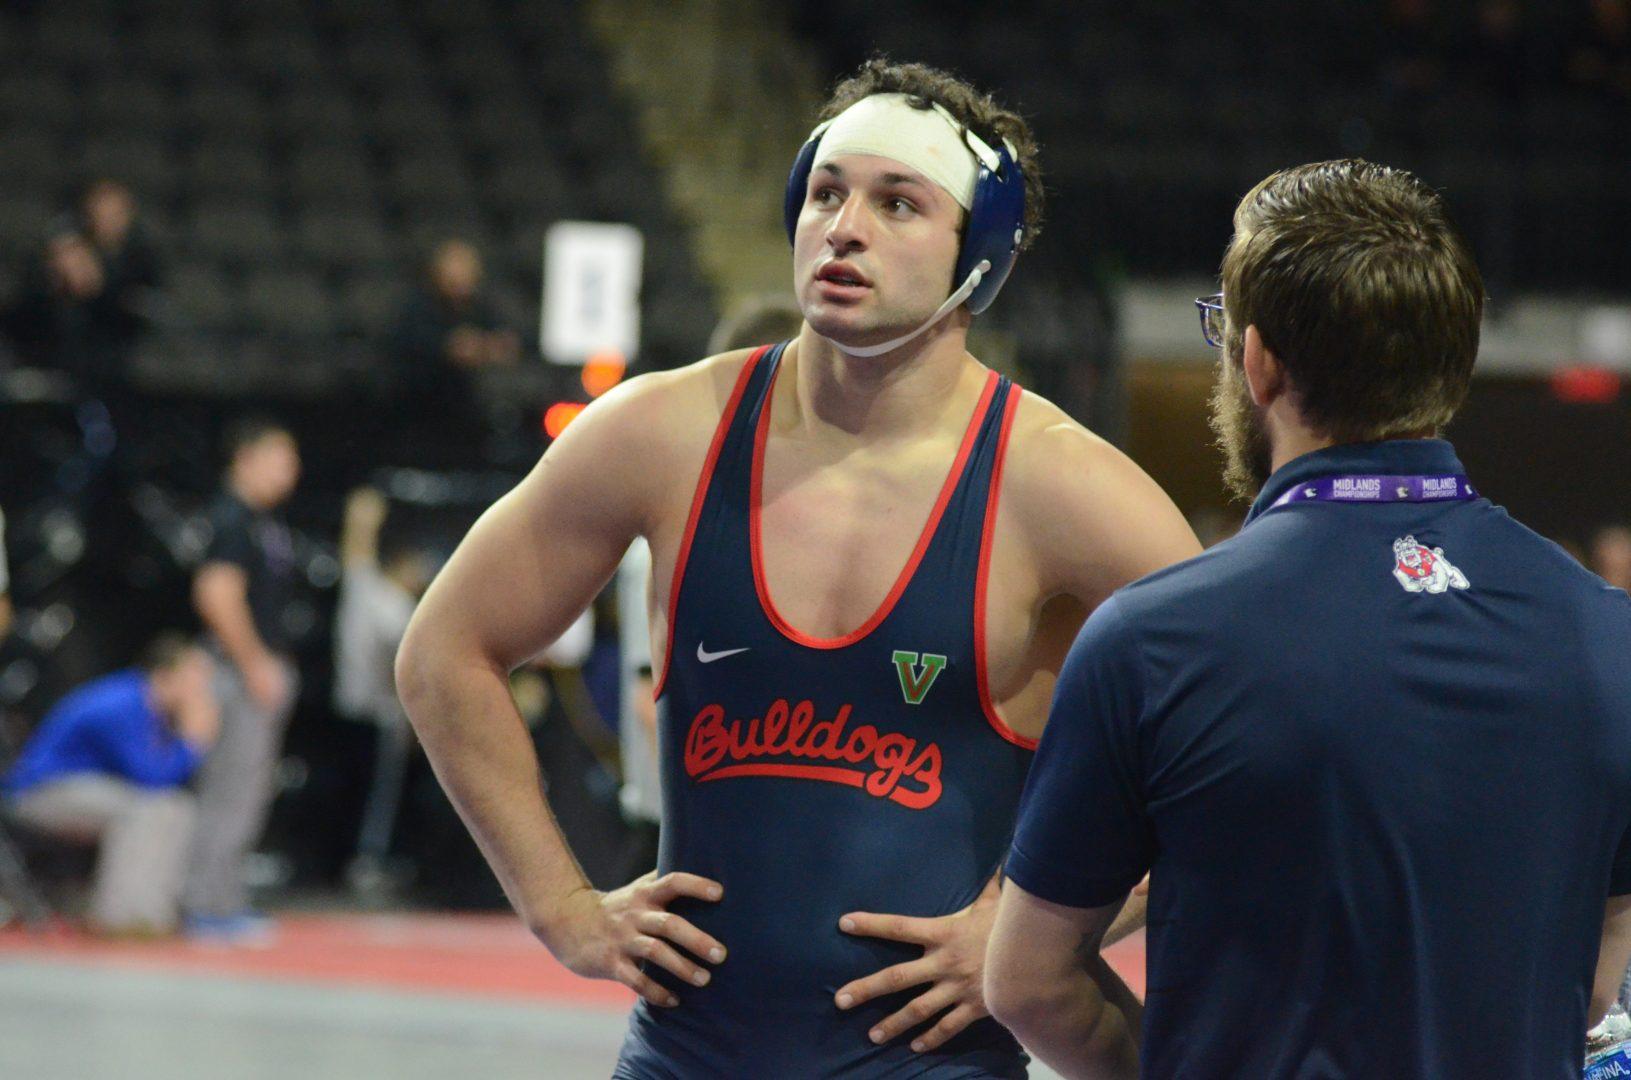 Josh Hokit earned a fifth place victory in overtime on Saturday. (Photo courtesy of Fresno State Athletics)